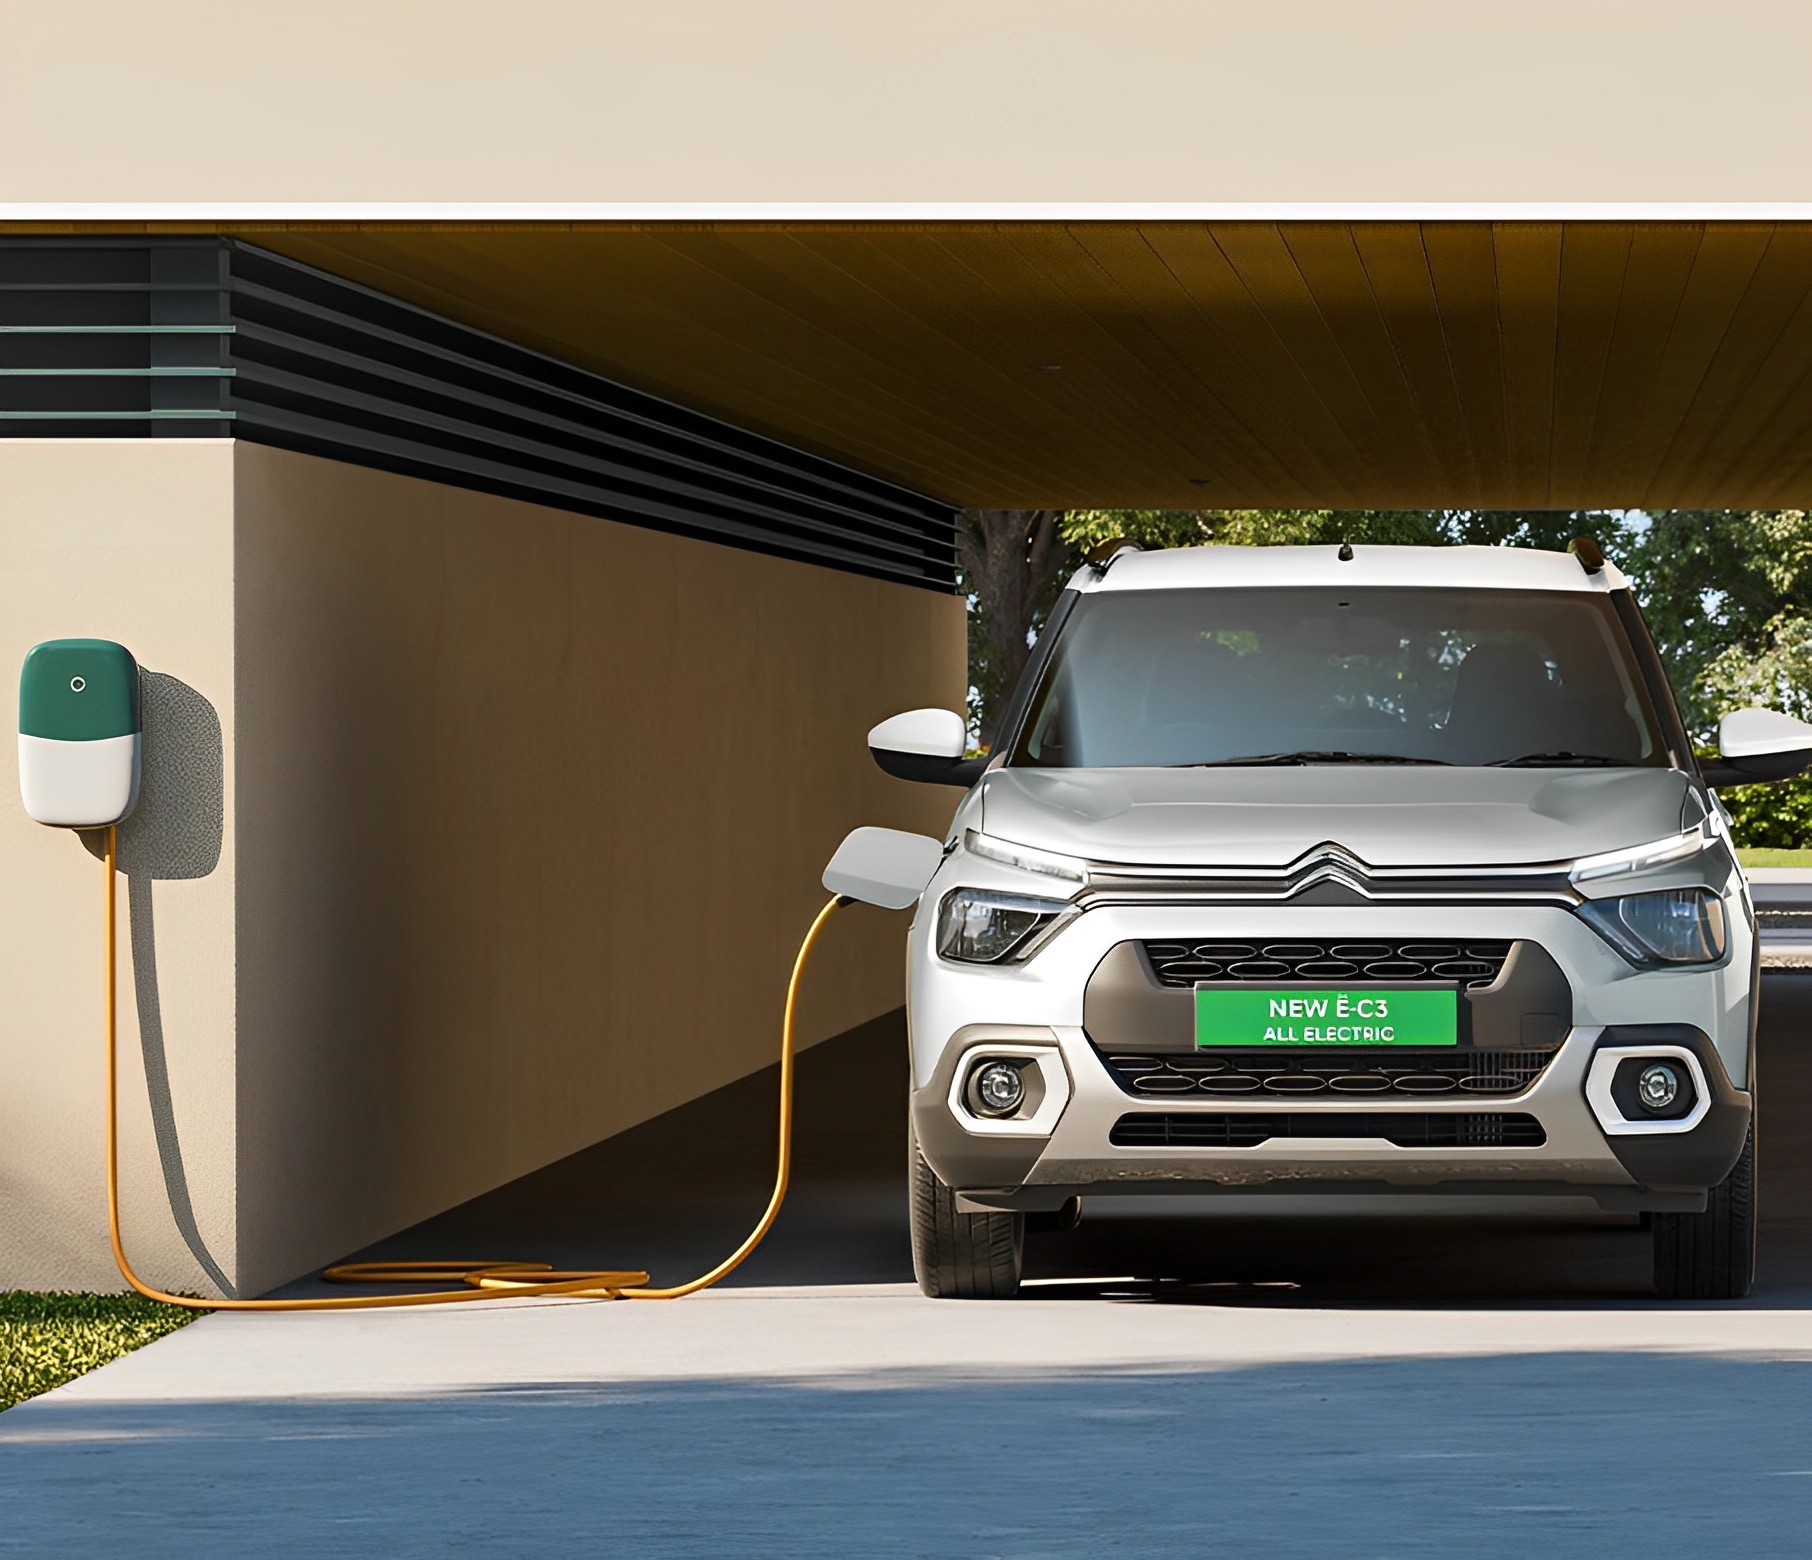 Citroen collaborates with Cab Eez Infra Tech to supply 2,000 EVs - E-Vehicleinfo